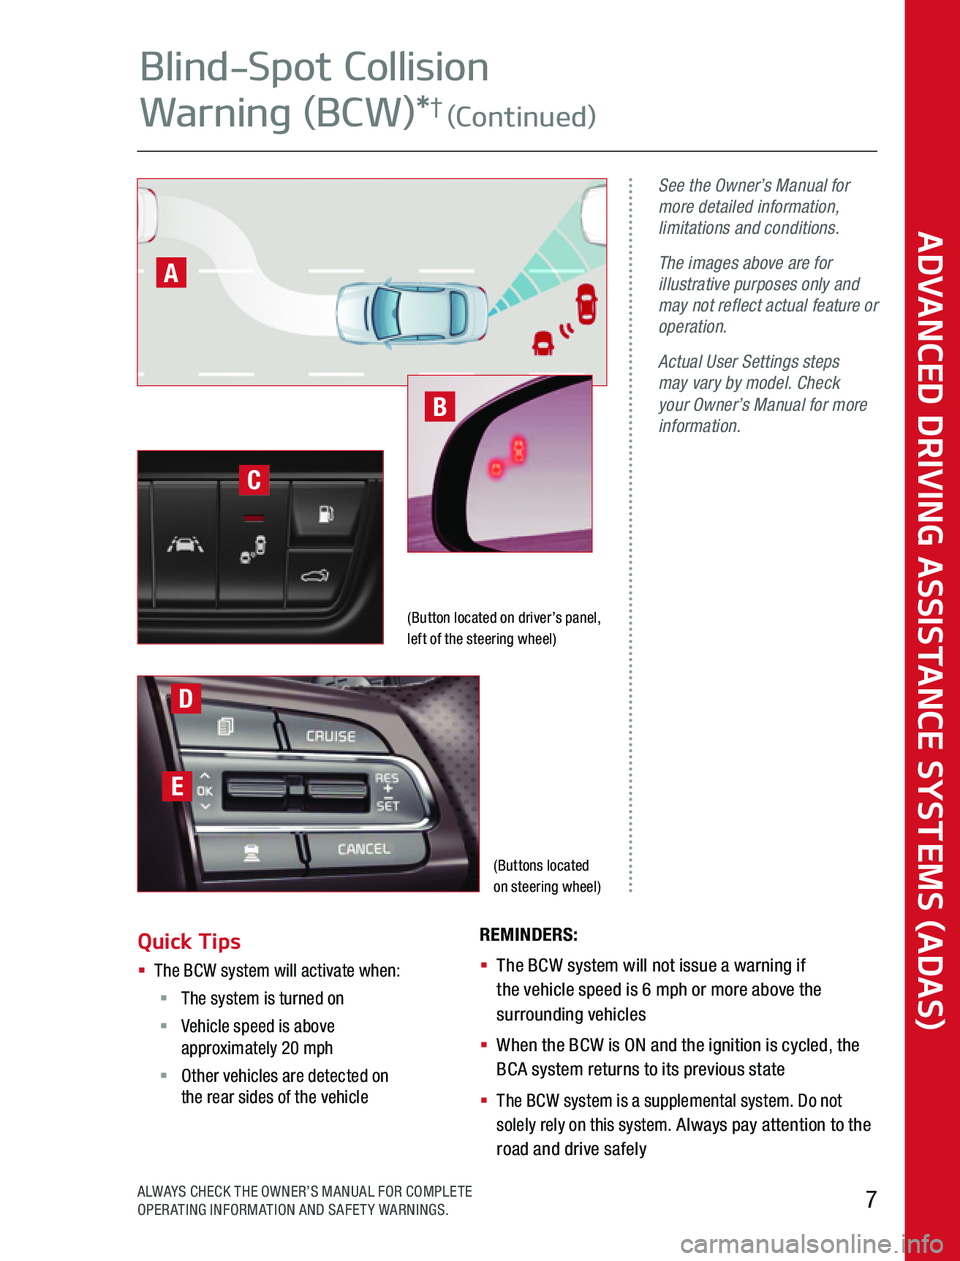 KIA OPTIMA HYBRID 2020  Advanced Driving Assistance System (Buttons located  on steering wheel)
See the Owner’s Manual for more detailed information, limitations and conditions.
The images above are for illustrative purposes only and may not reflect actual 